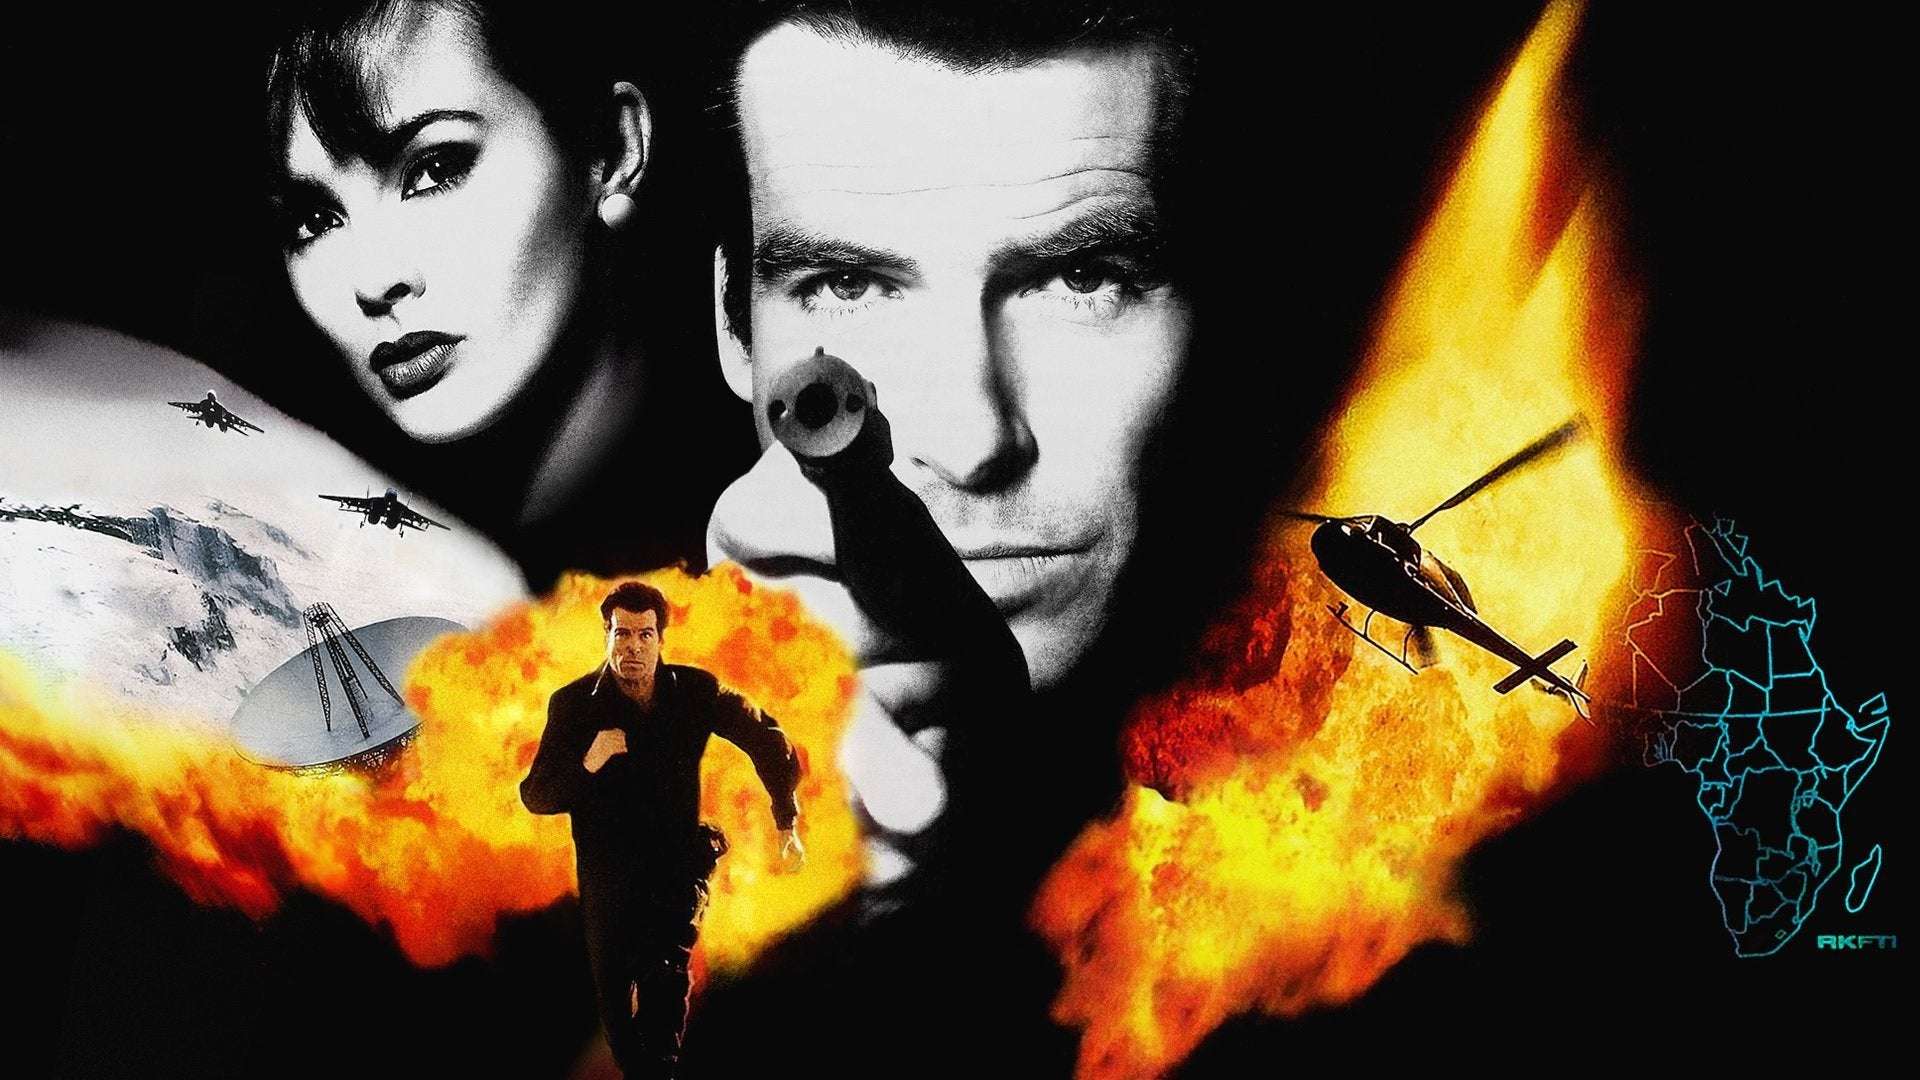 image for A Goldeneye 007 remaster ‘could be revealed in the next few weeks’, it’s claimed